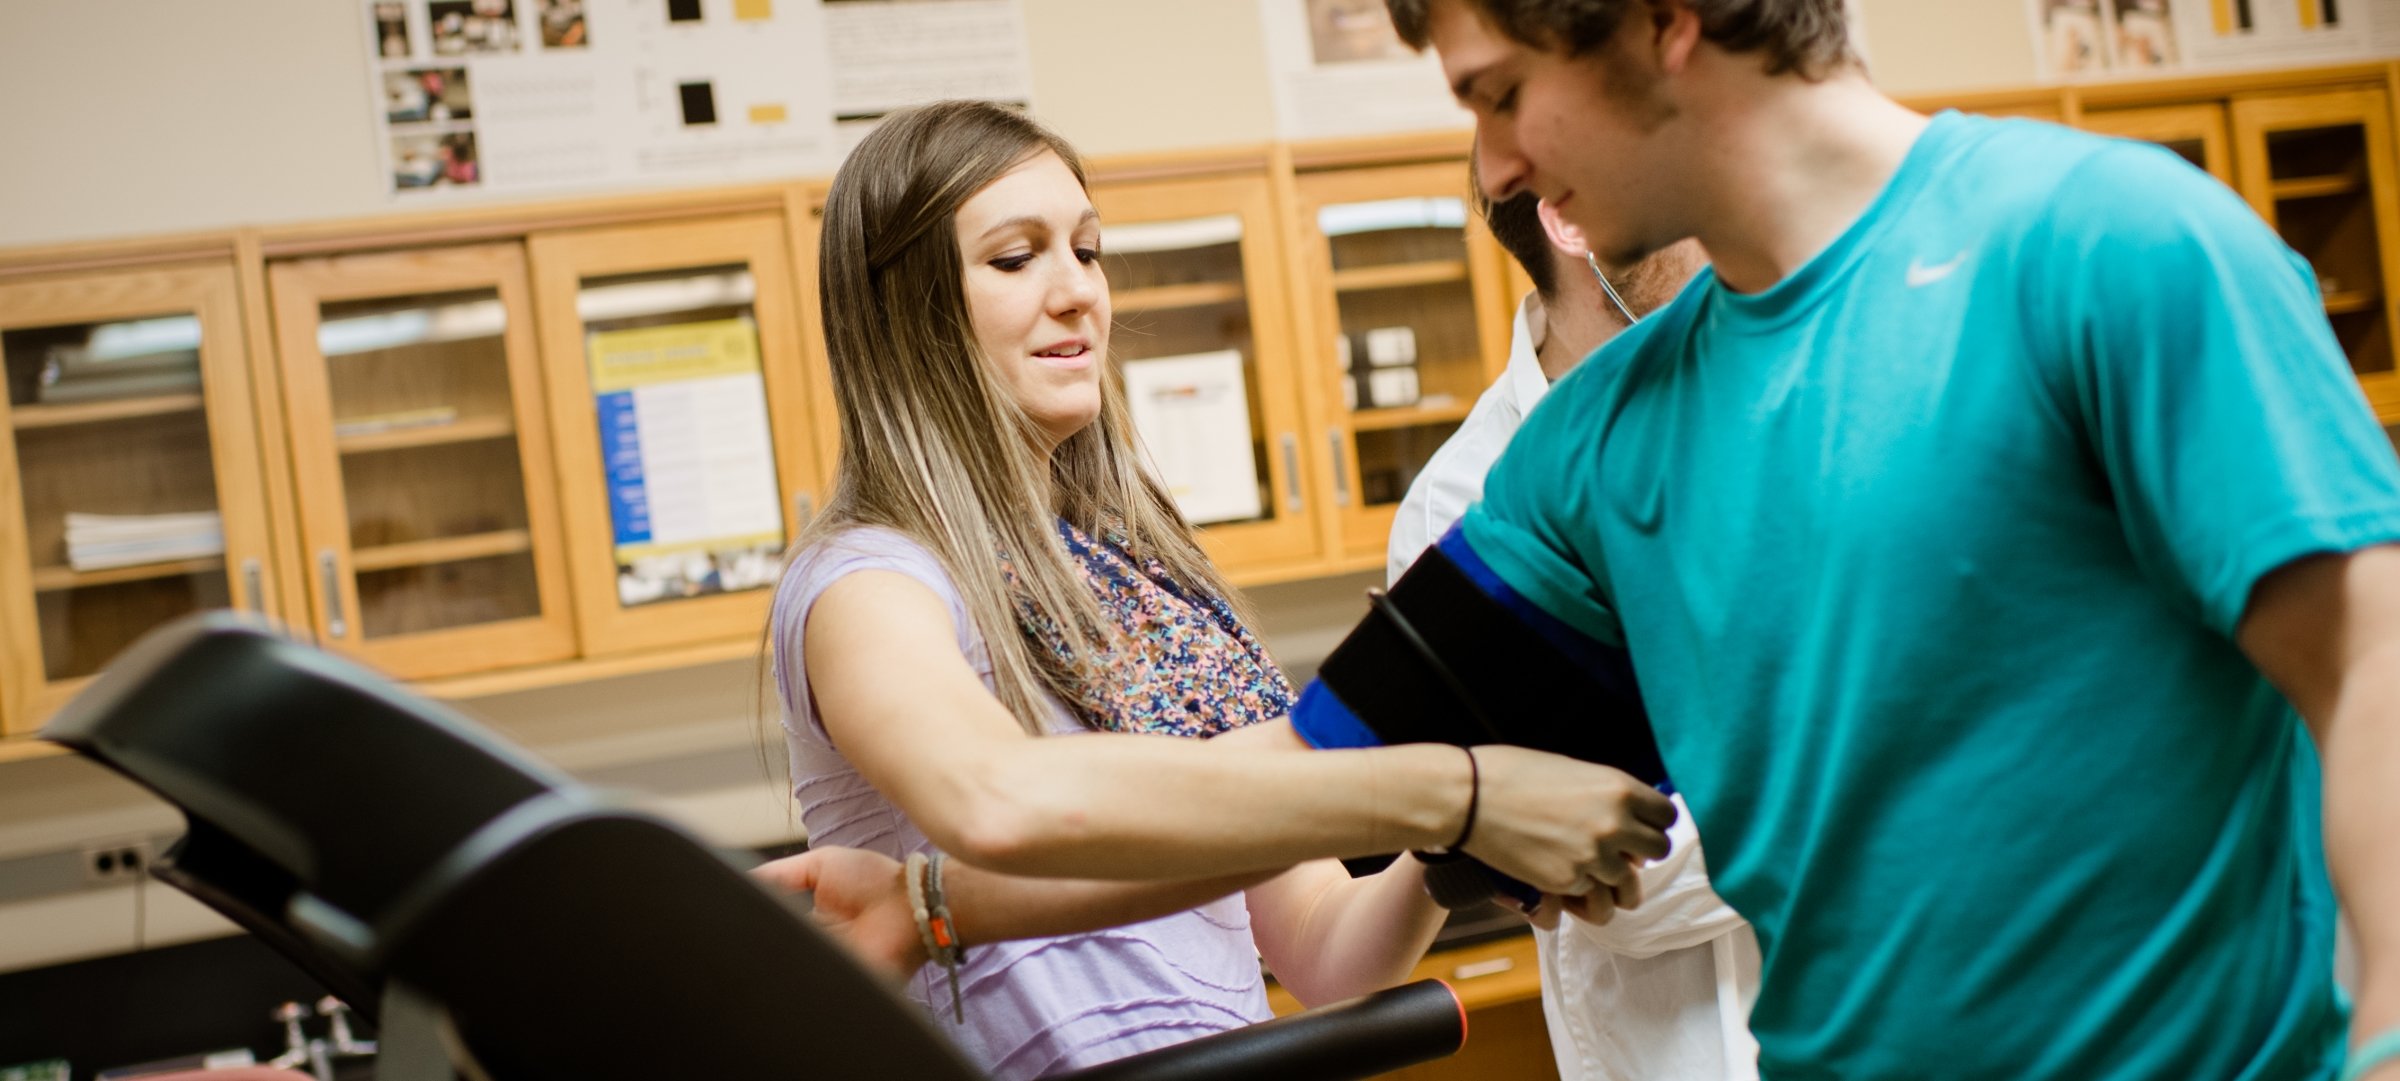 Researcher connects a blood pressure cuff to a student standing on a treadmill.